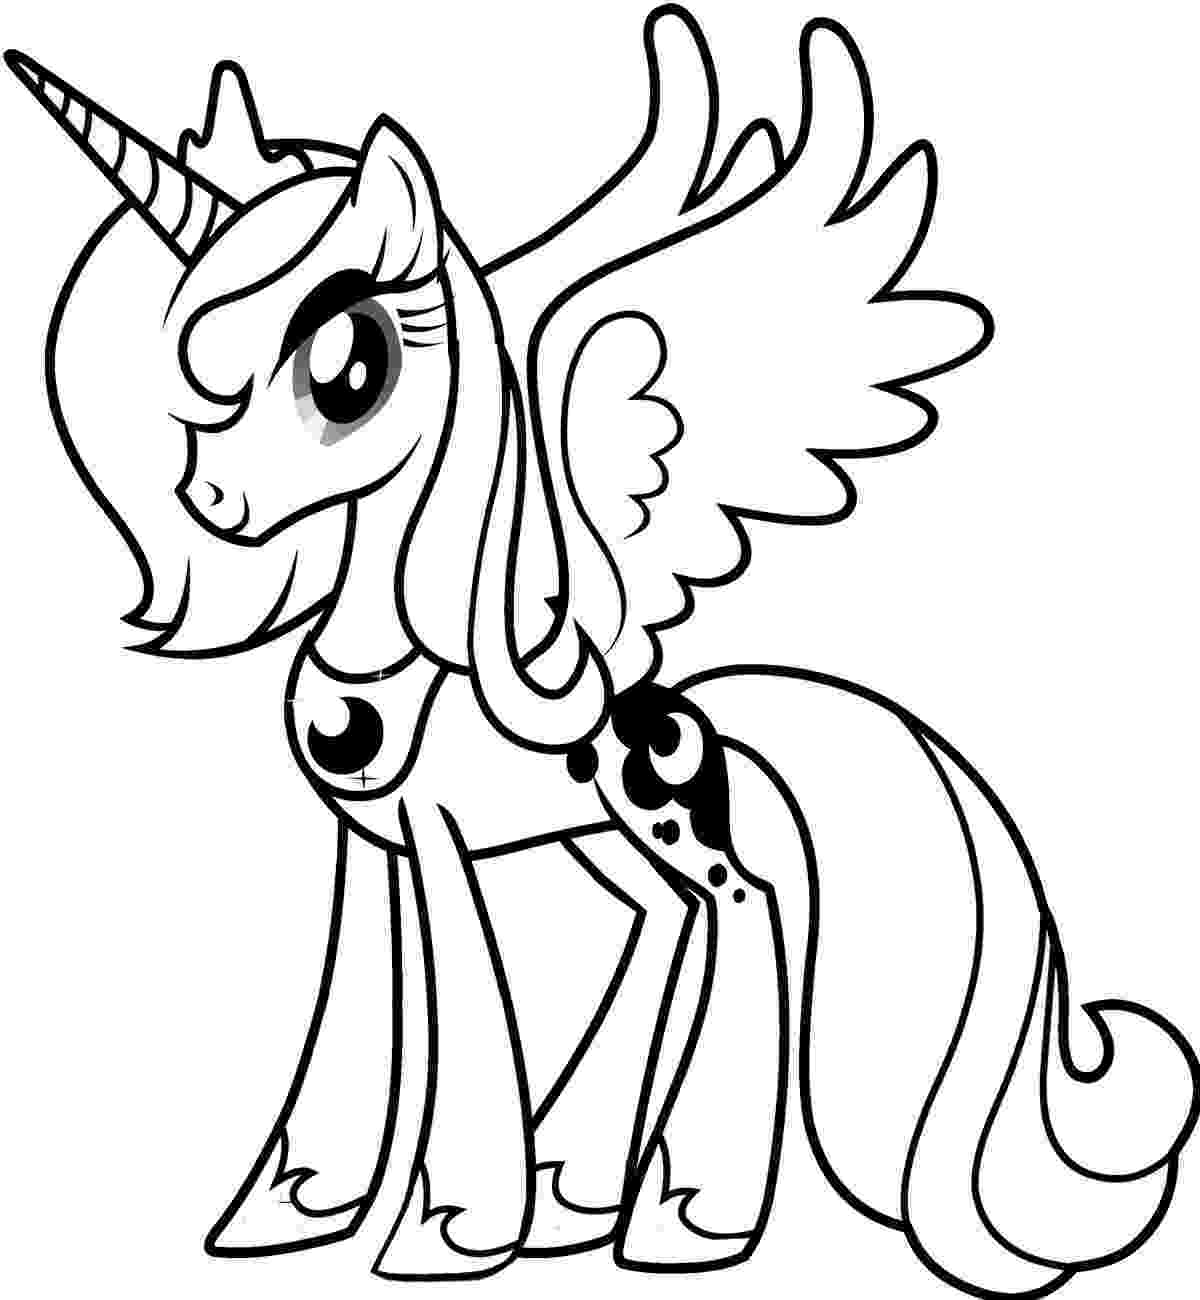 my little pony color sheets my little pony coloring pages print and colorcom little my sheets color pony 